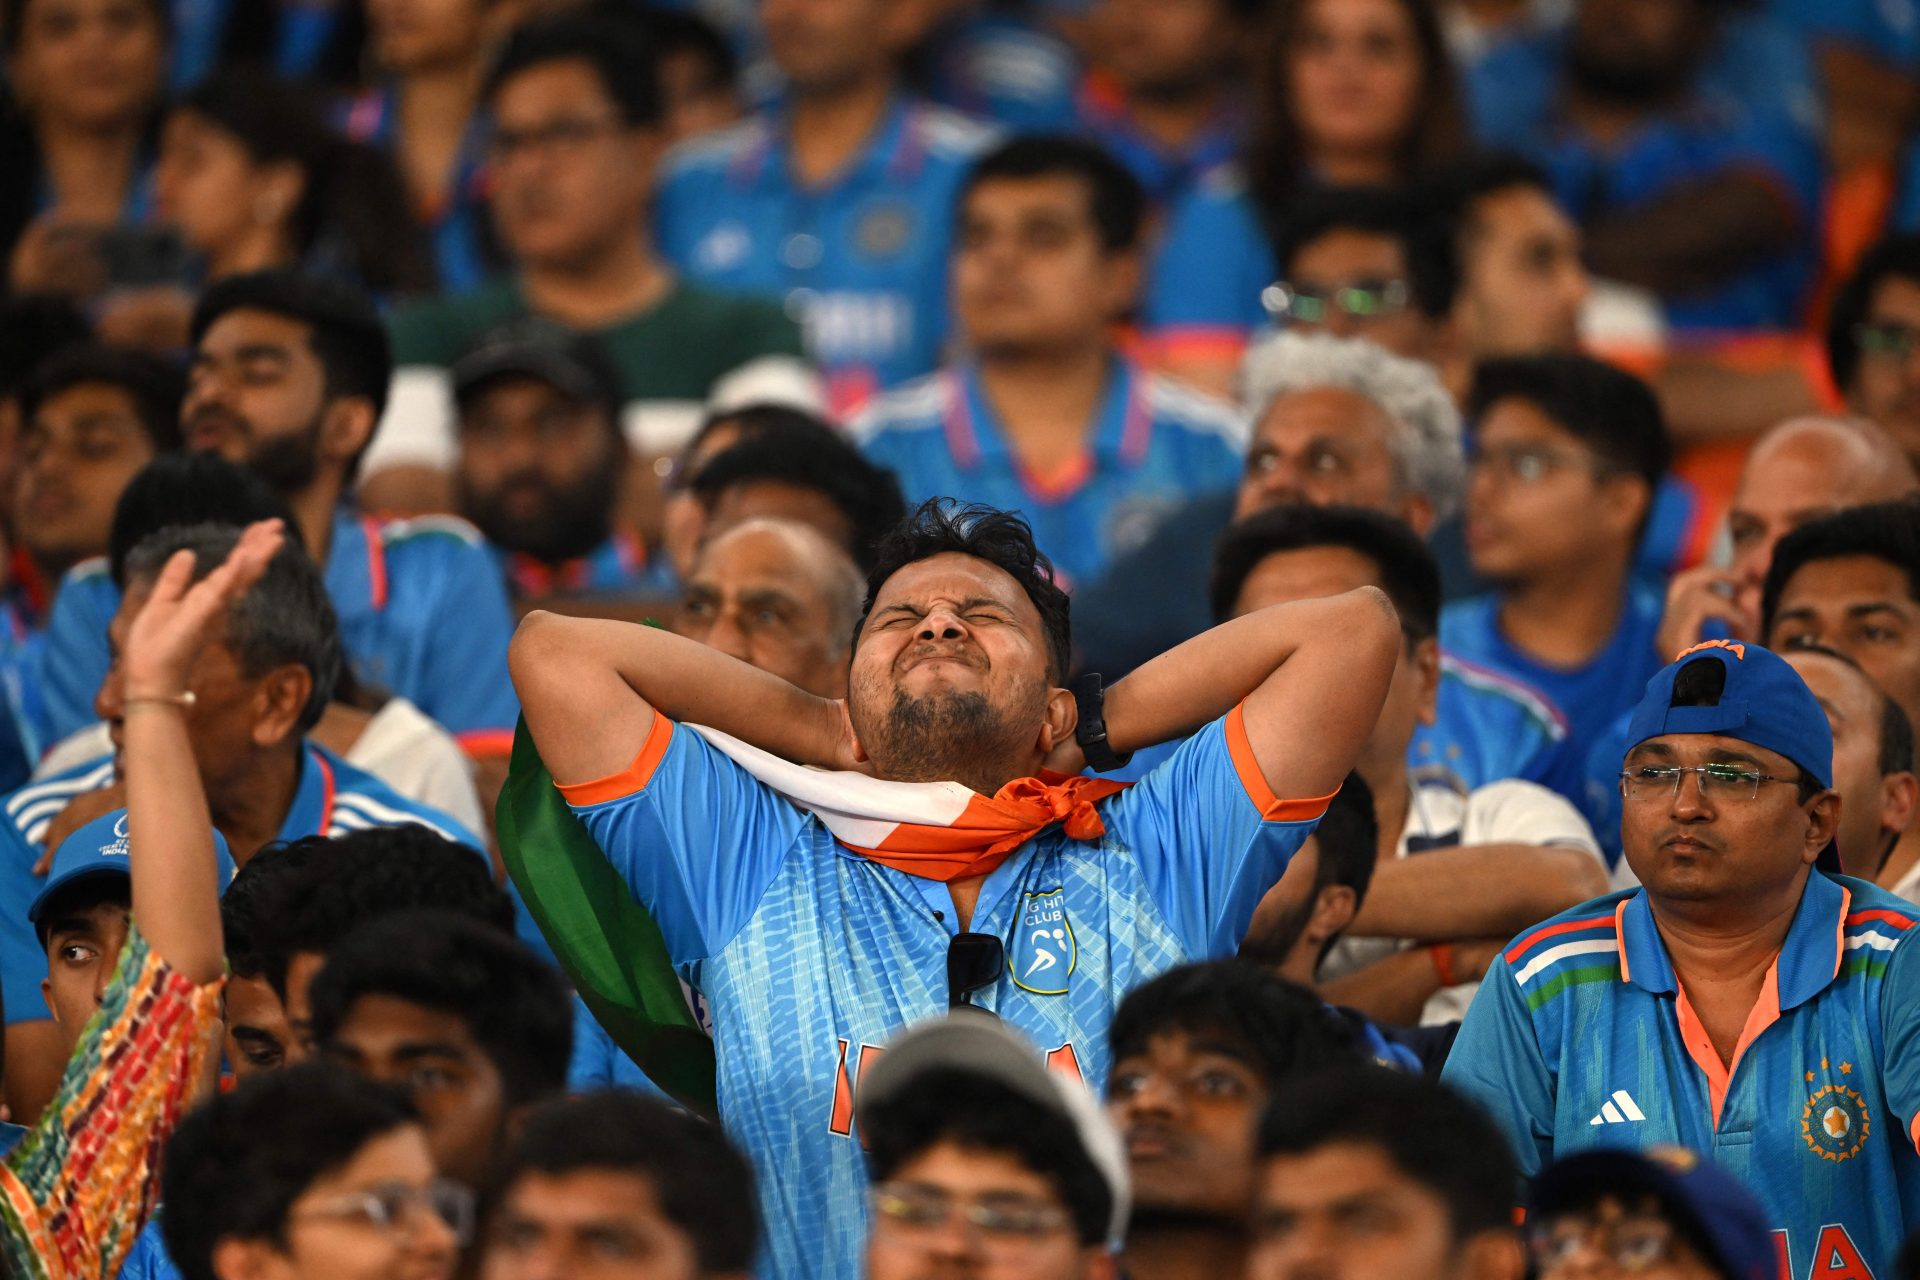 Where did it all go wrong for India at the World Cup?